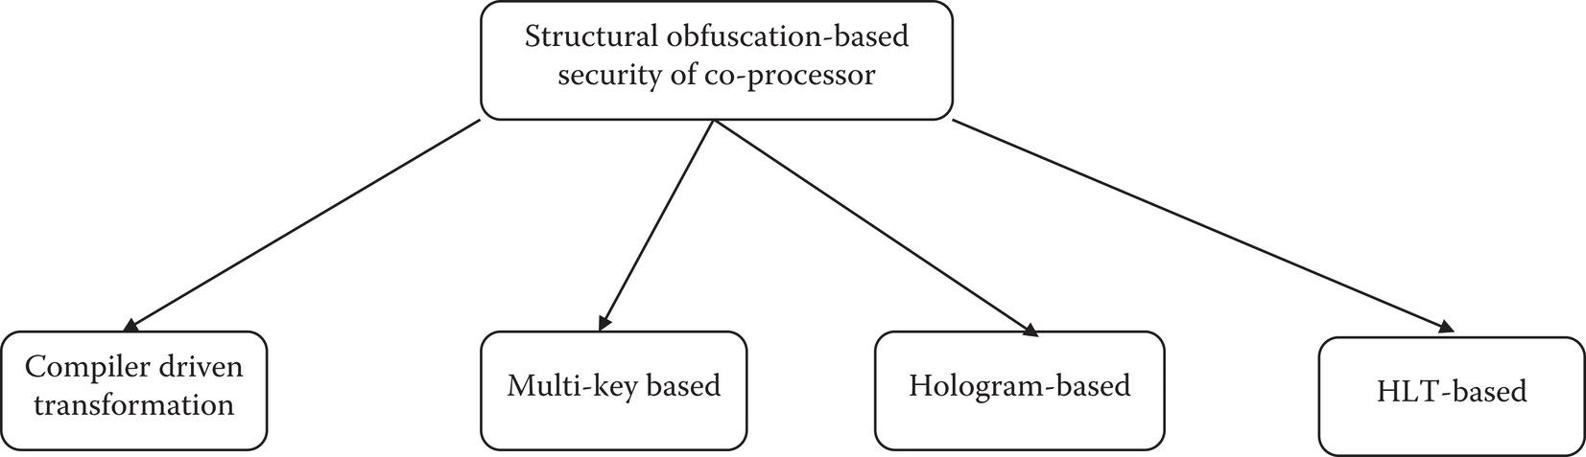 Figure 12 Workflow of structural obfuscation-based security methodology for - photo 2